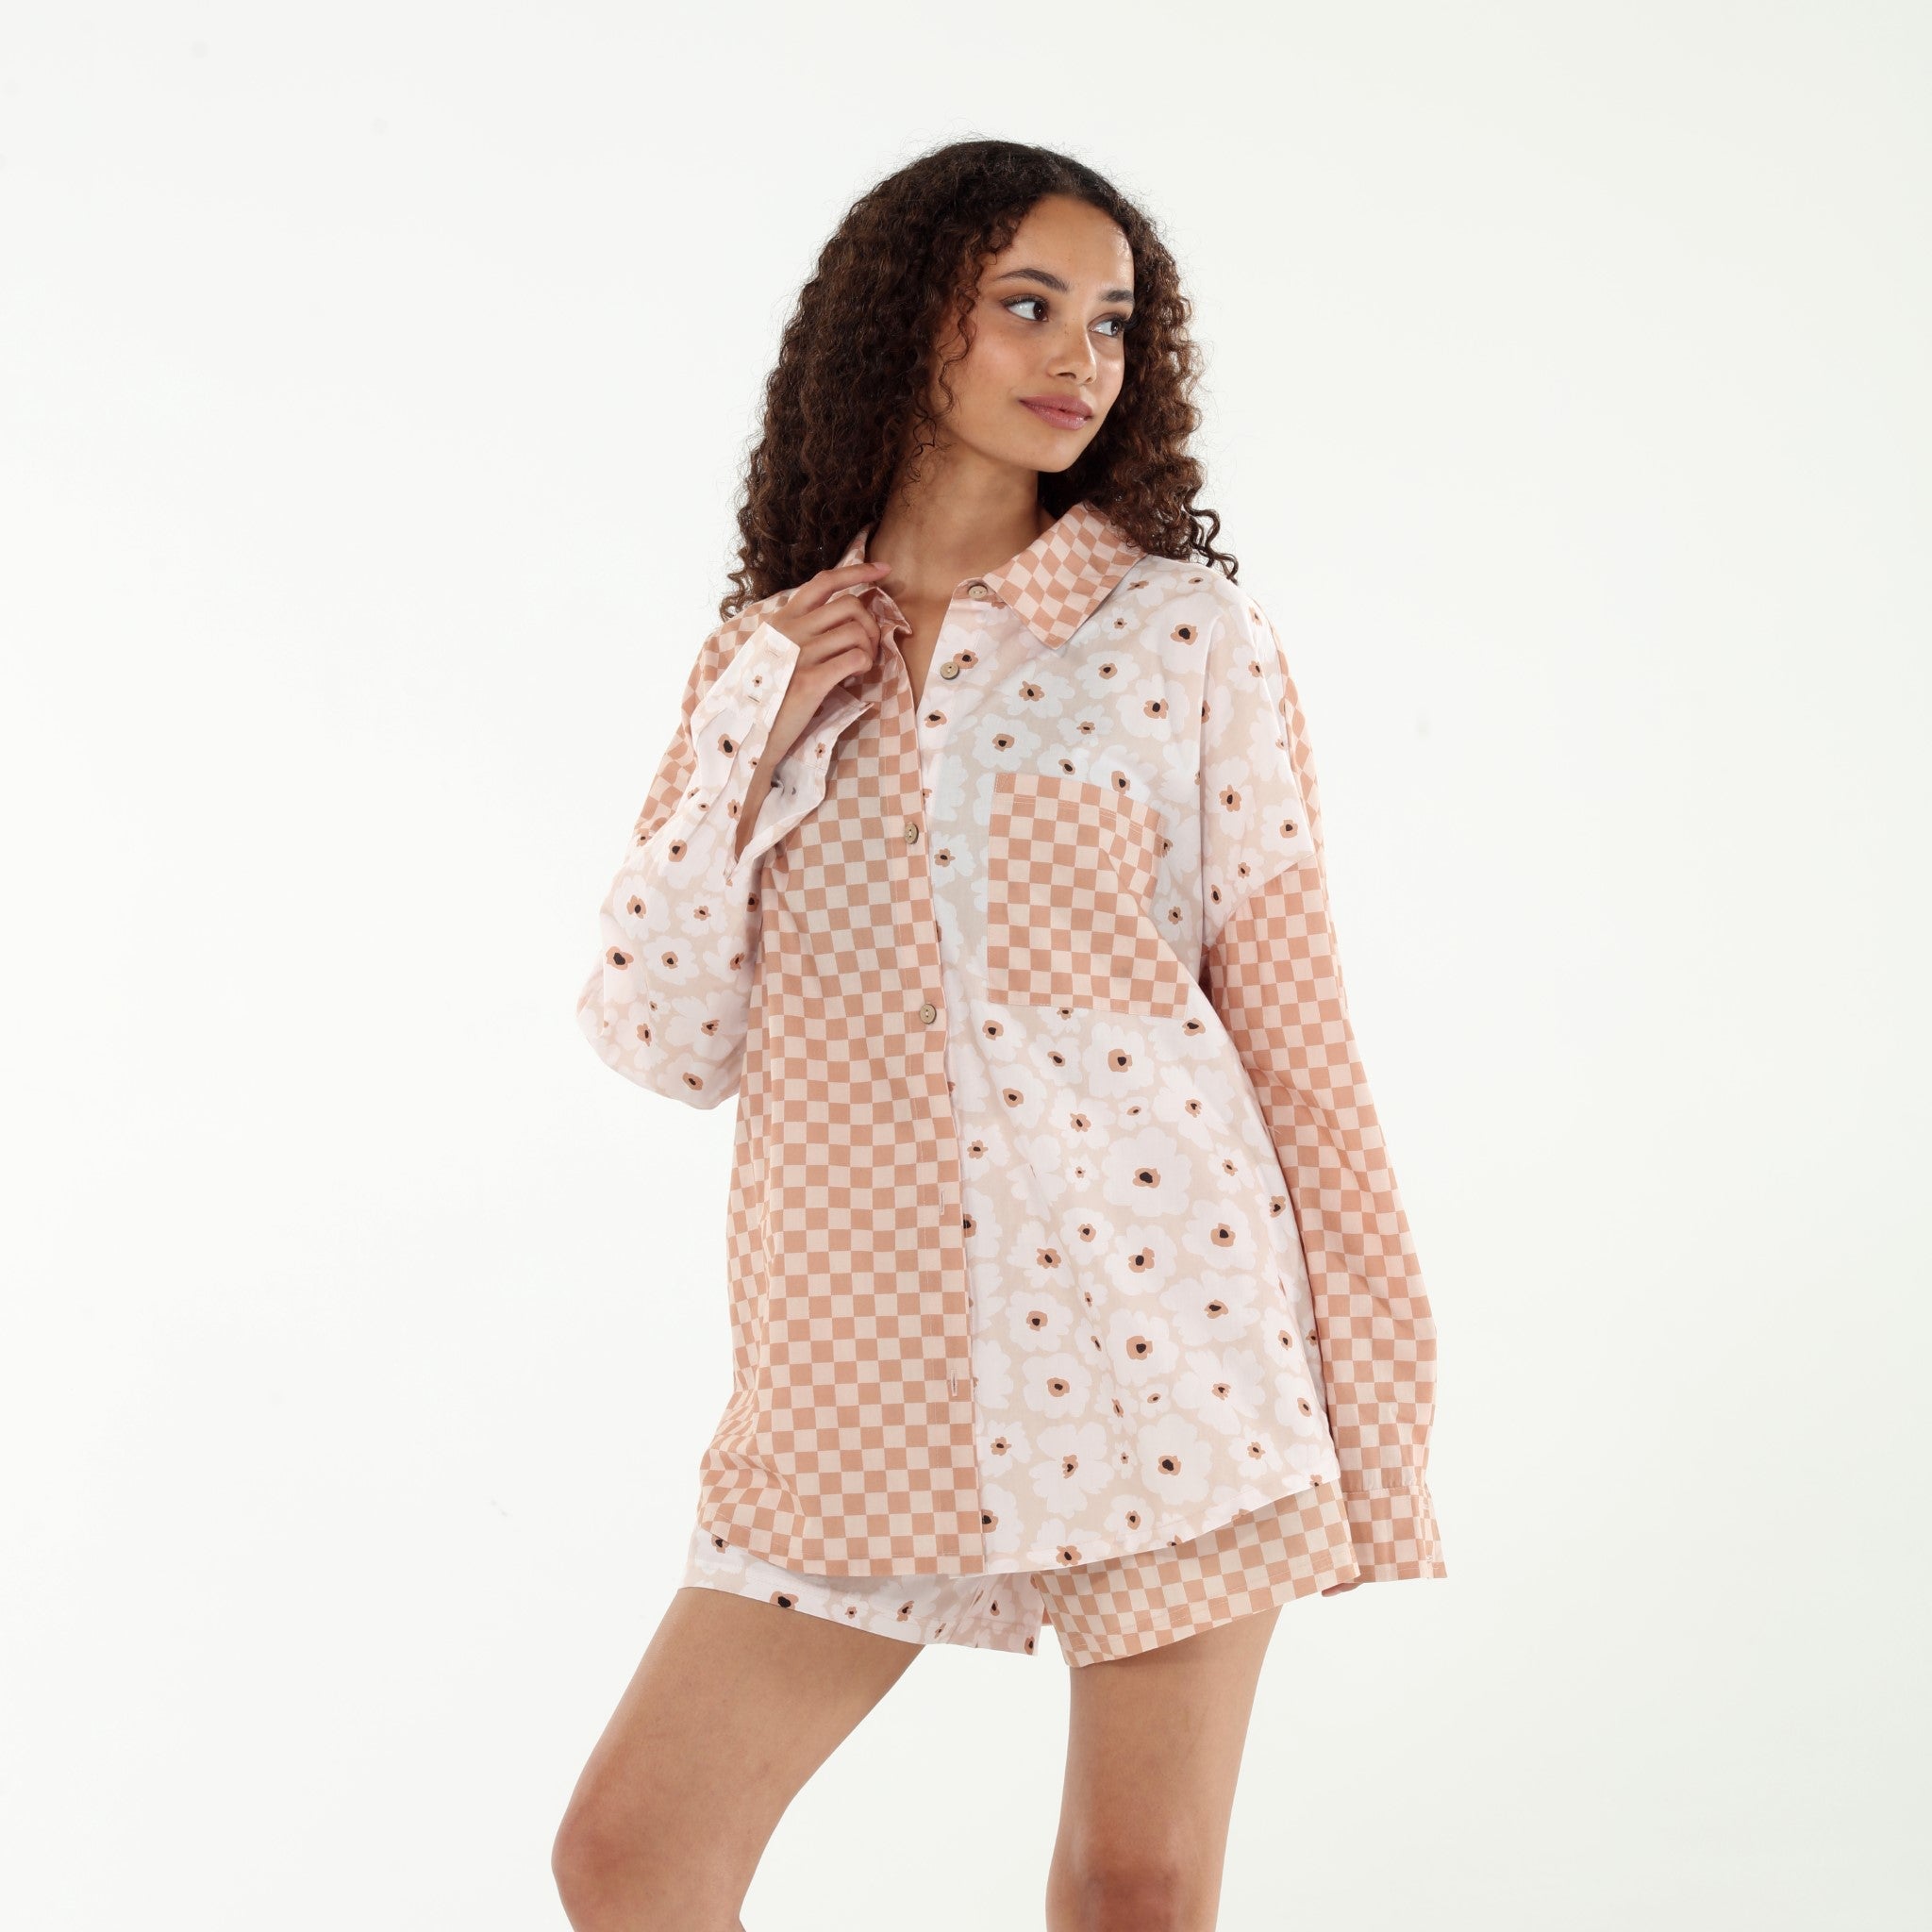 Vacation Mode Lounge Shirt - Loungewear - Floral Check